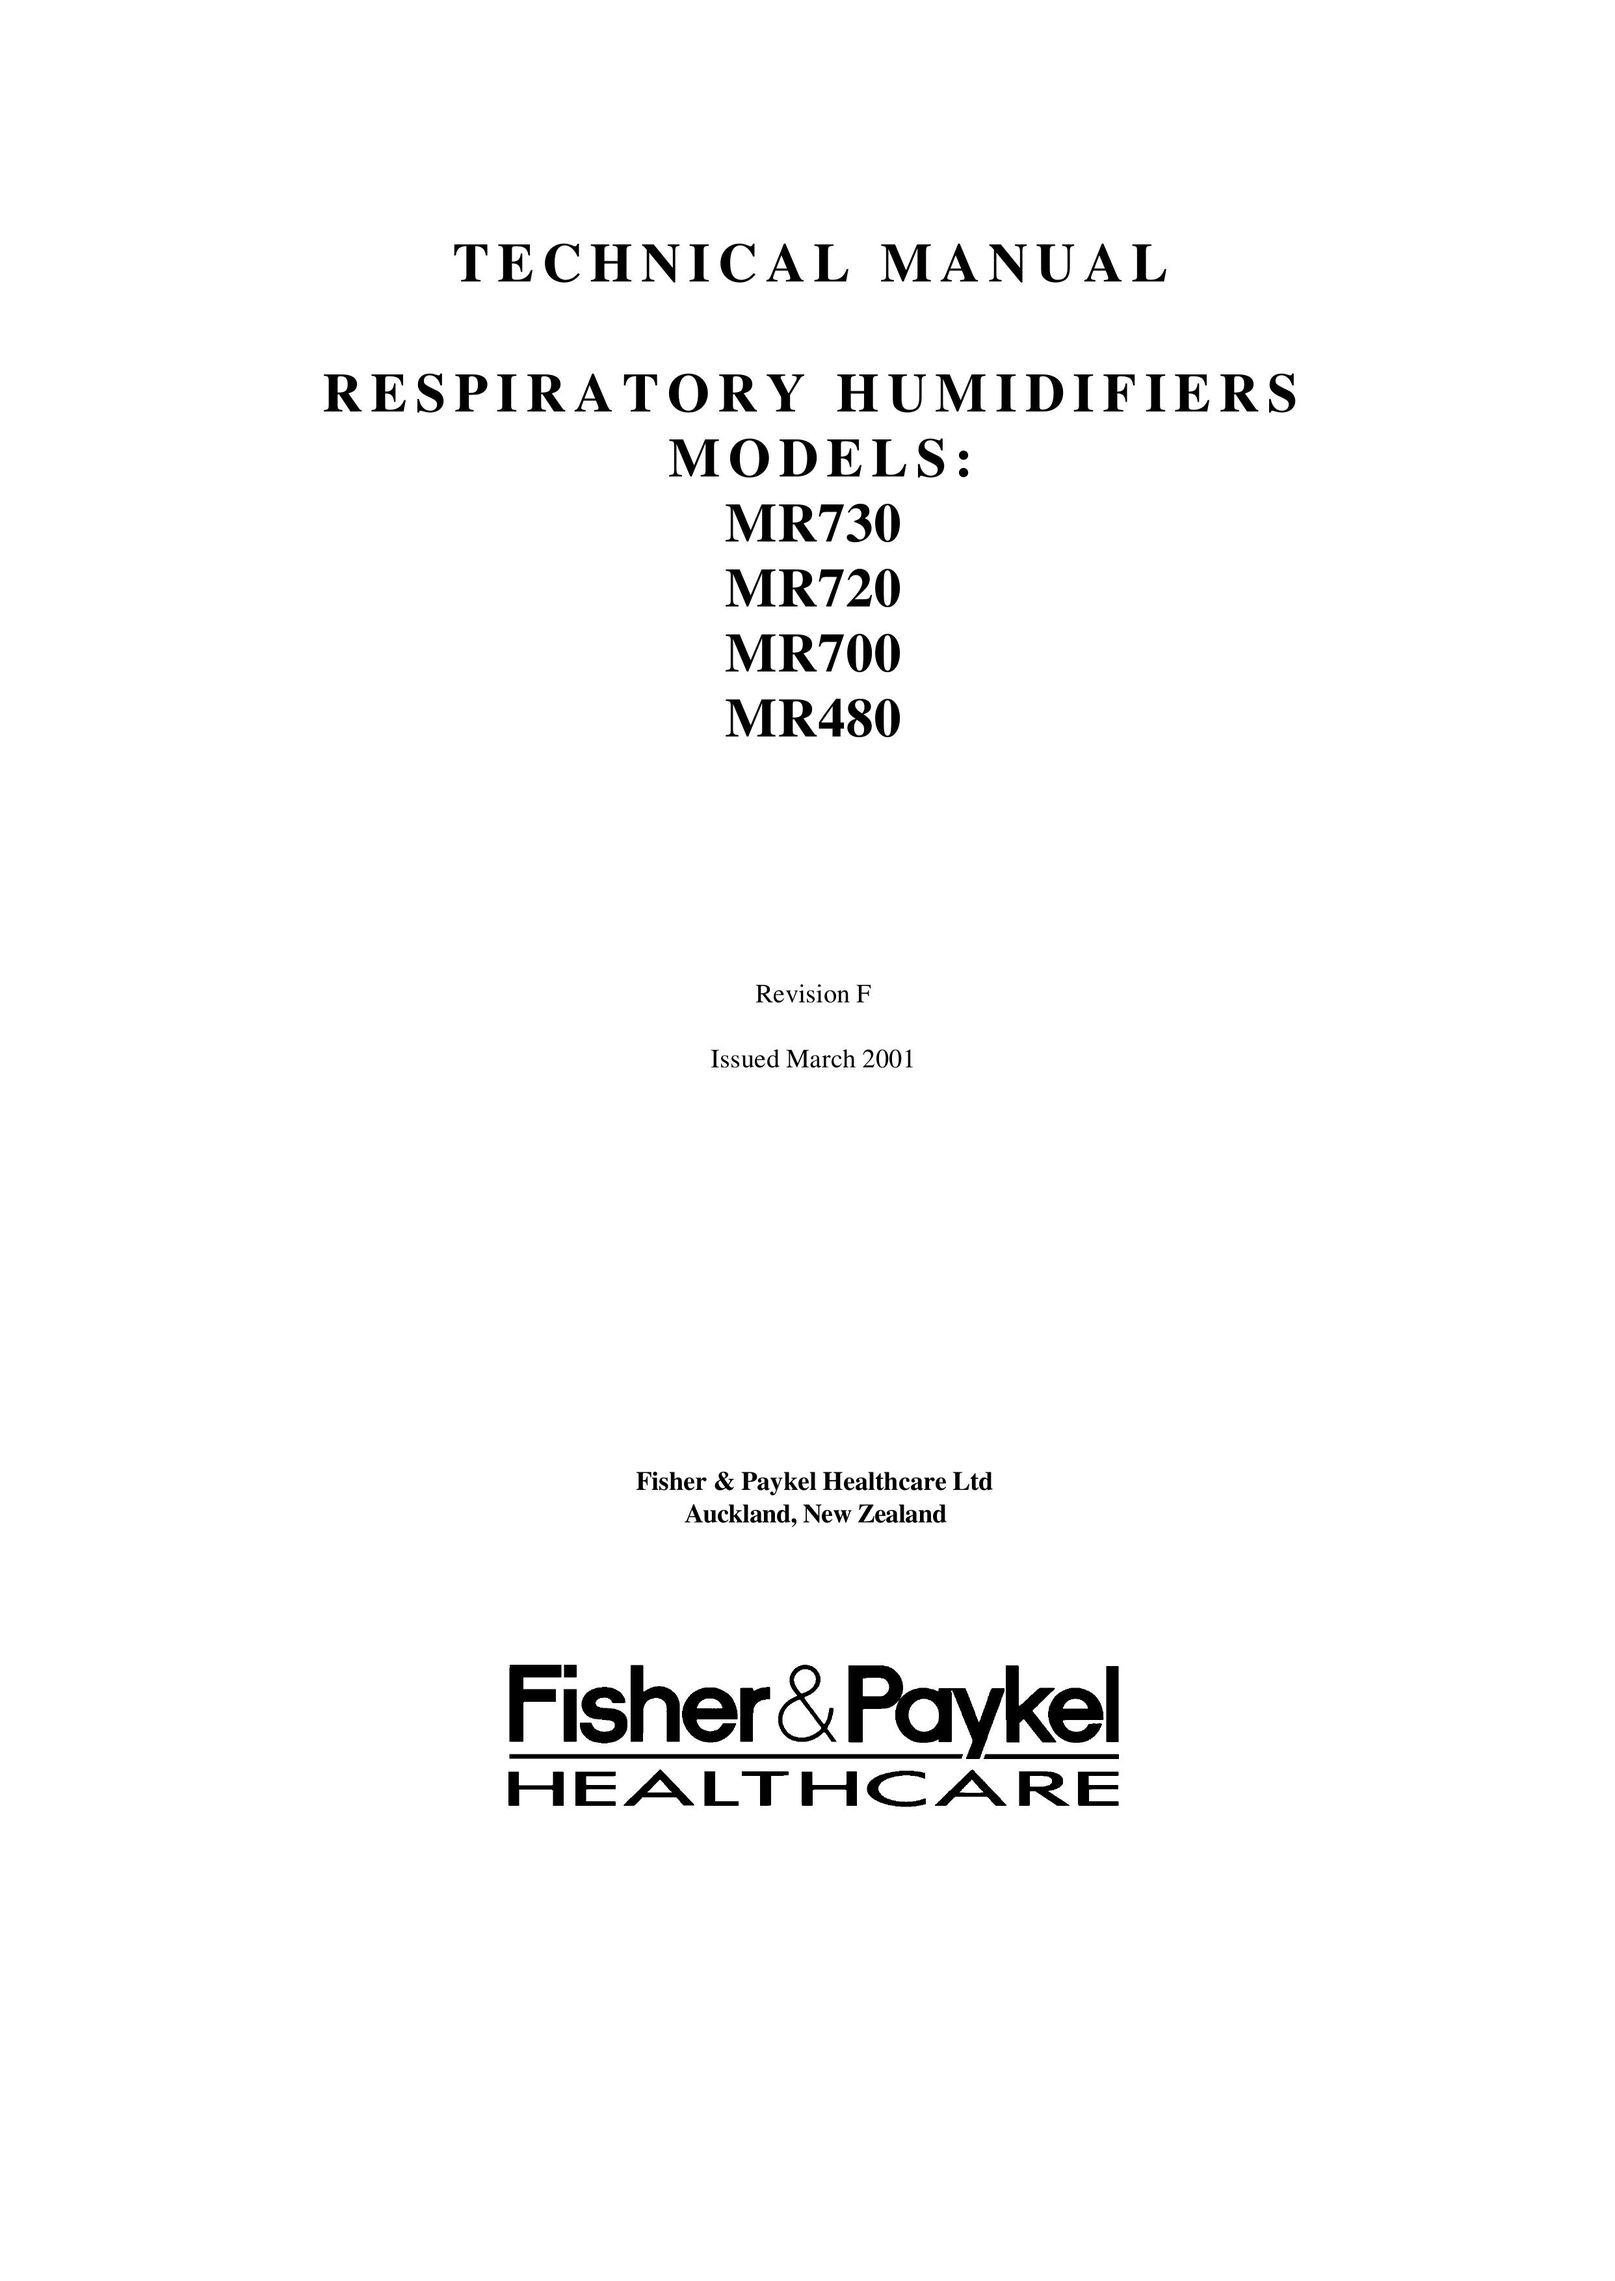 Fisher & Paykel MR720 Humidifier User Manual